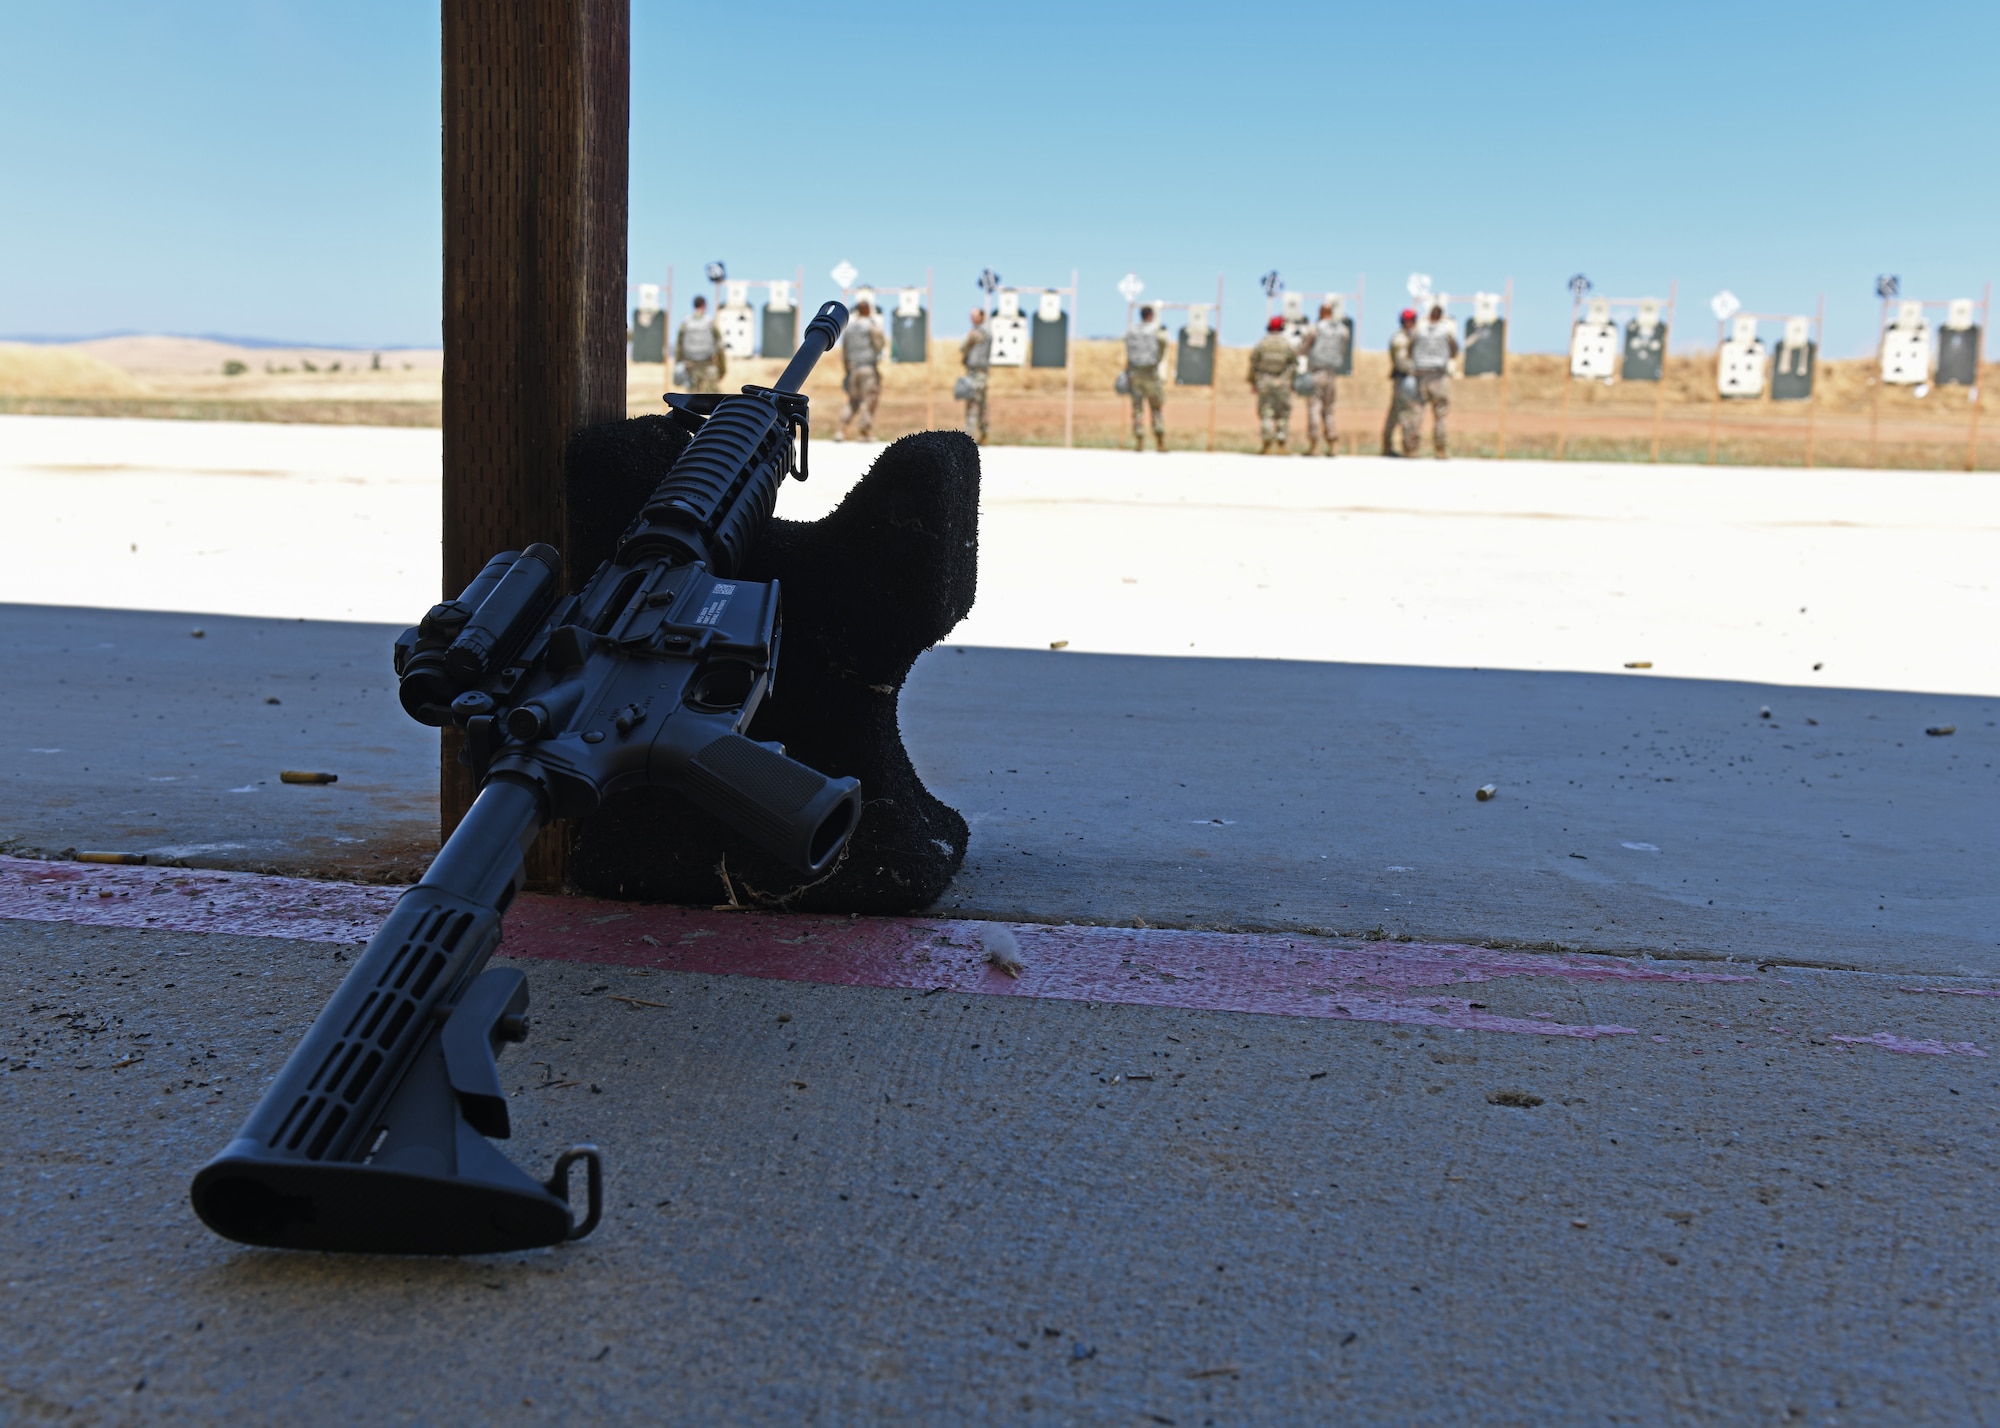 An M4 Carbine lays on a shooting rest during a Combat Arms Training and Maintenance (CATM) course, June 22, 2020, at Beale Air Force Base California. CATM instructors teach Airmen how to properly use, disassemble, and clean a weapon safely. (U.S. Air Force photo by Airman 1st Class Luis A. Ruiz-Vazquez)